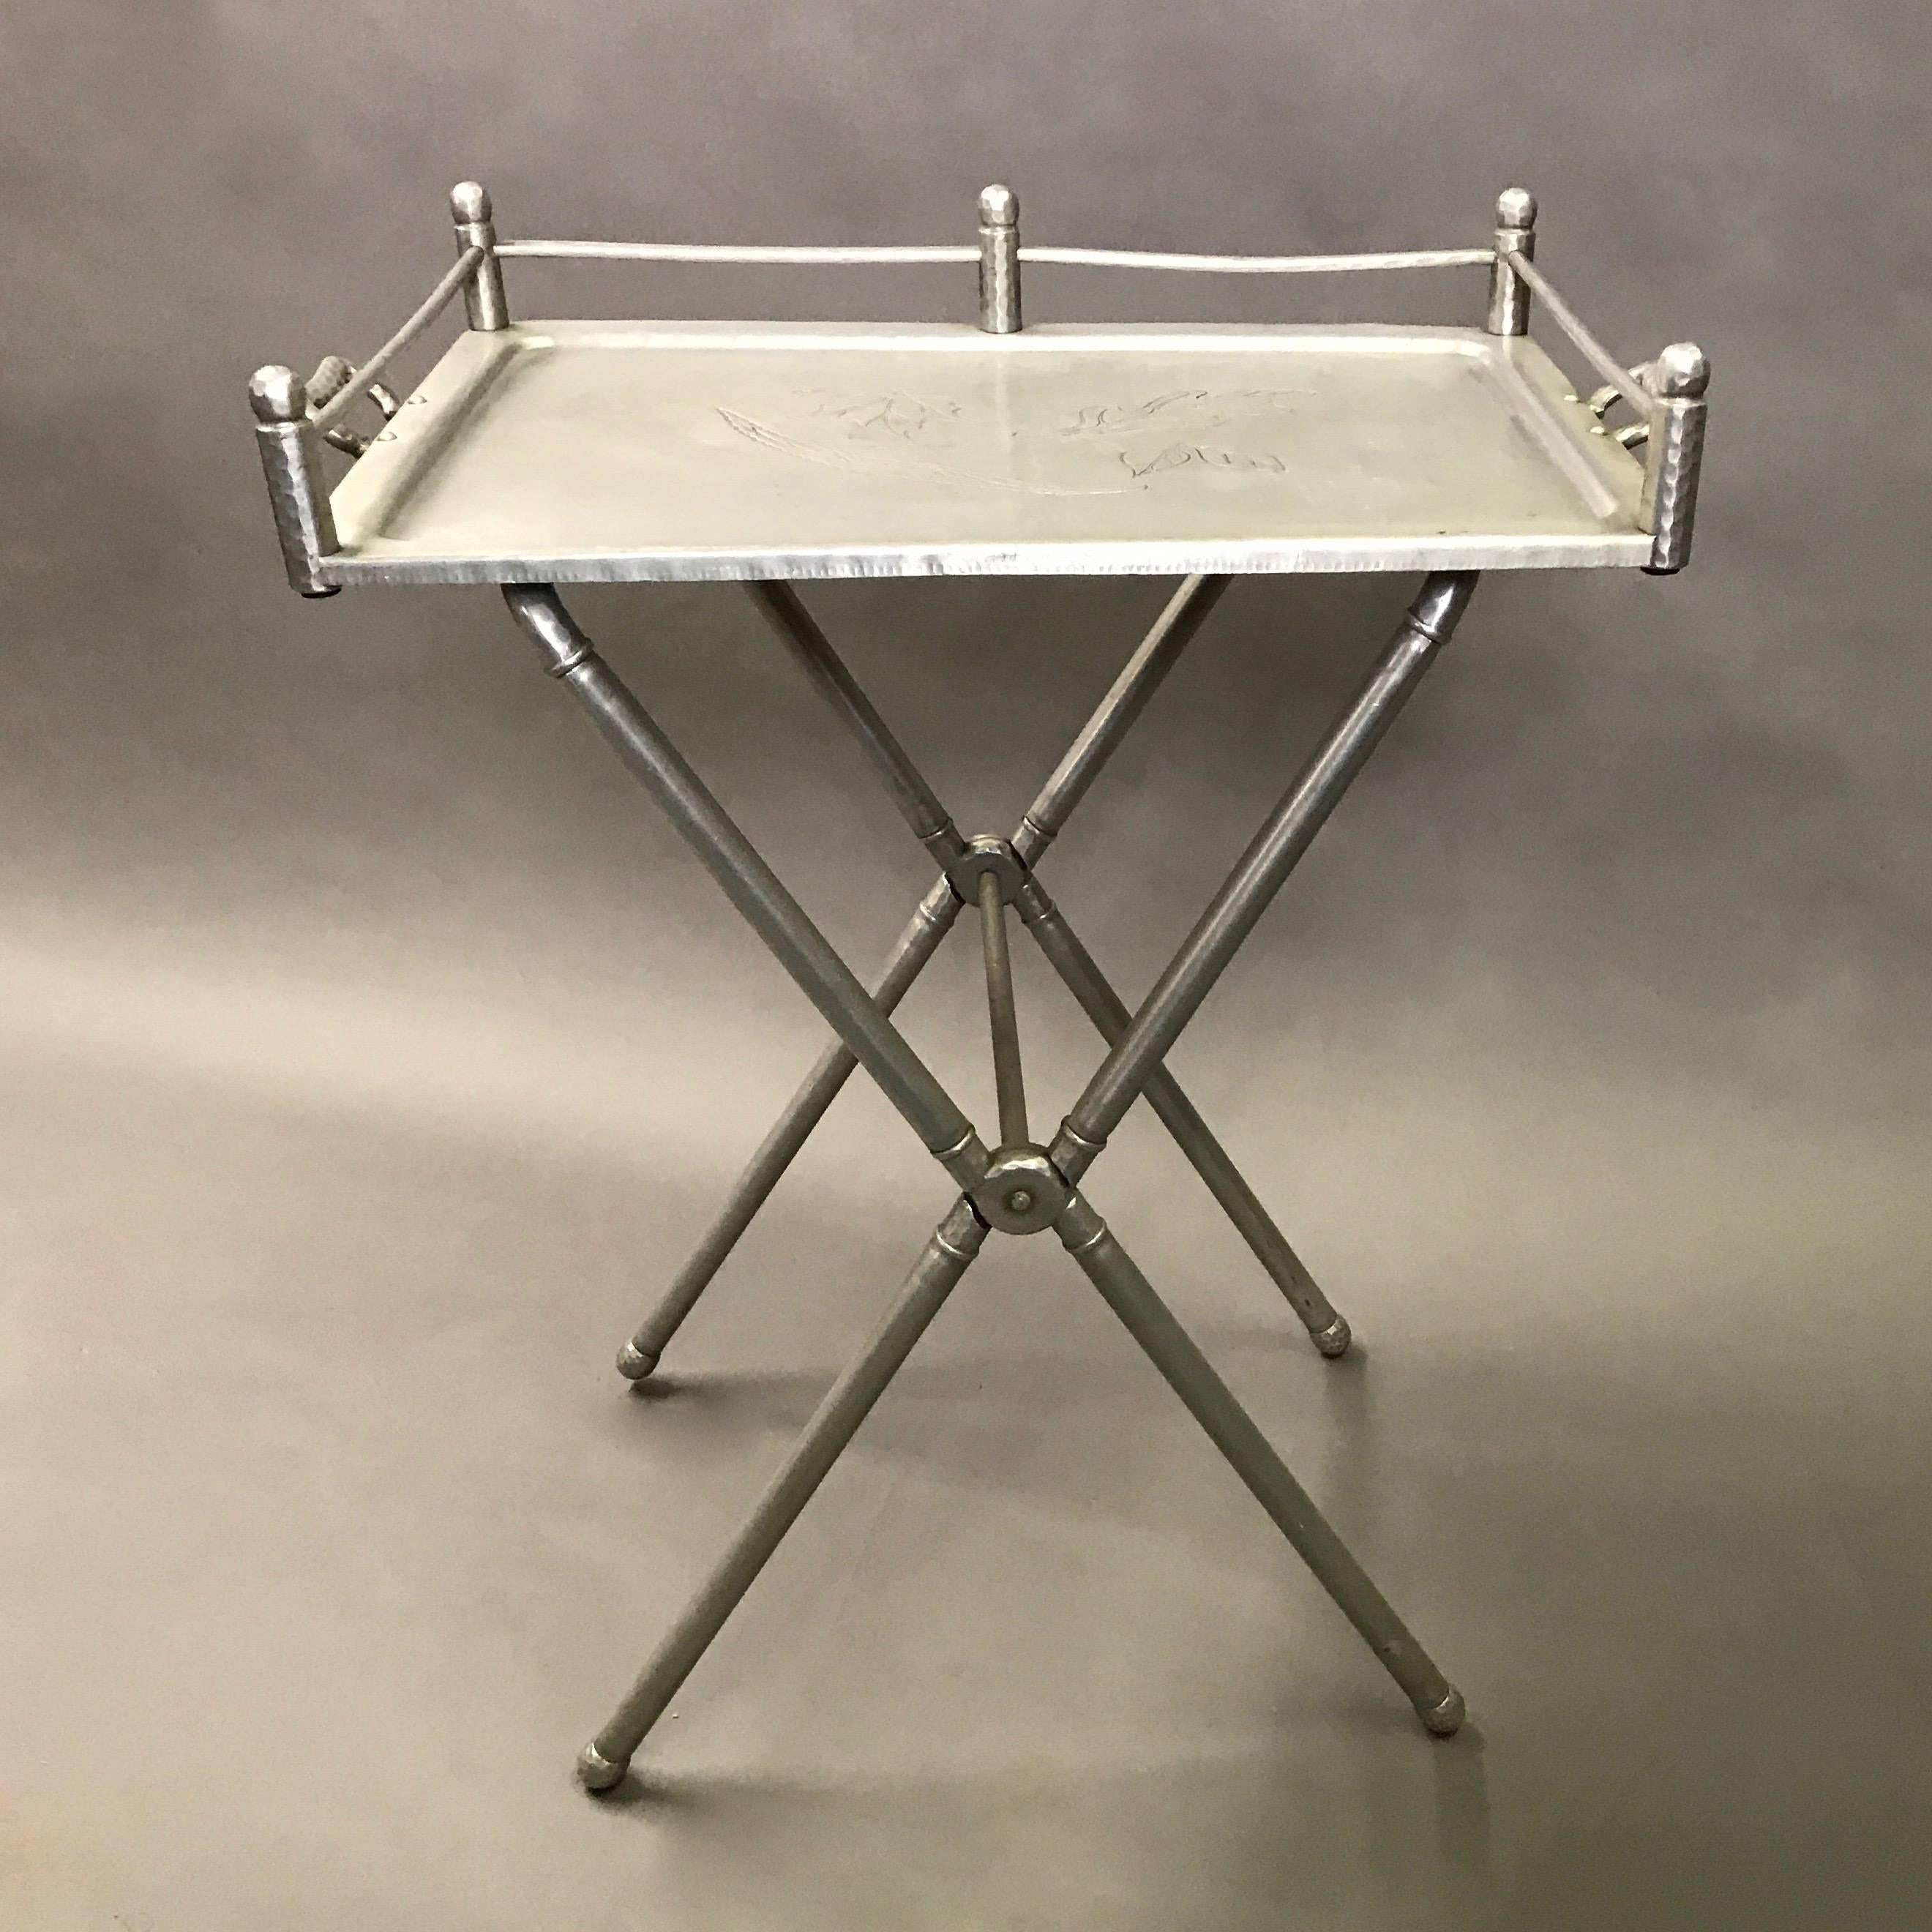 Hollywood Regency, hand-wrought, bar tray table produced by Everlast Metal Products Corp. features folding table base and removable tray with foliate engravings designed by Mary Wright.